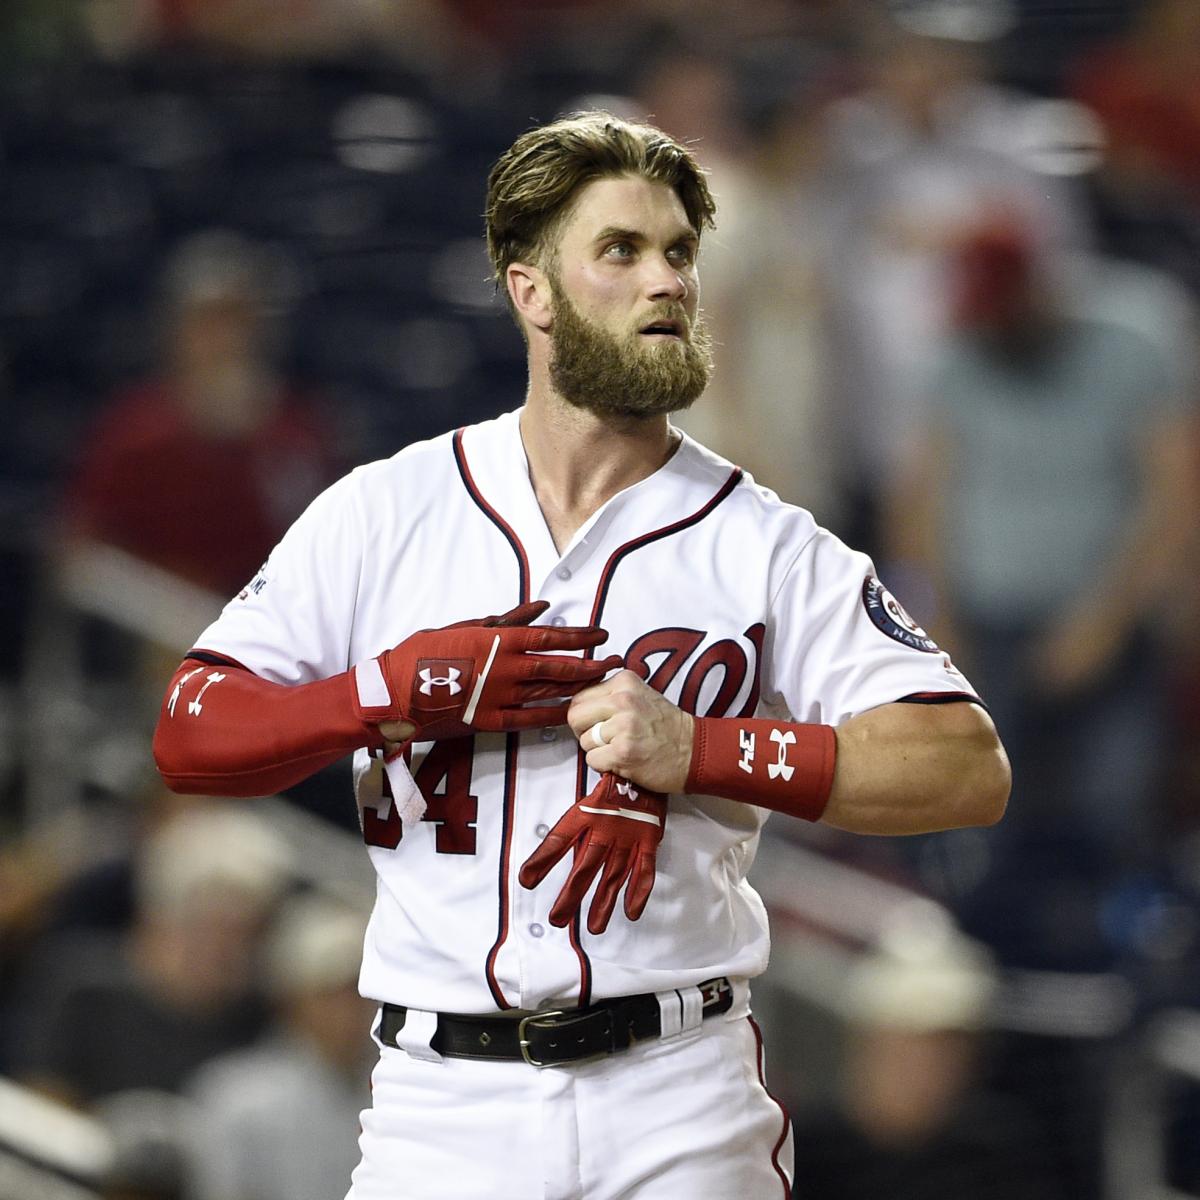 Odds for Each Suitor on Top Free Agents Bryce Harper, Manny